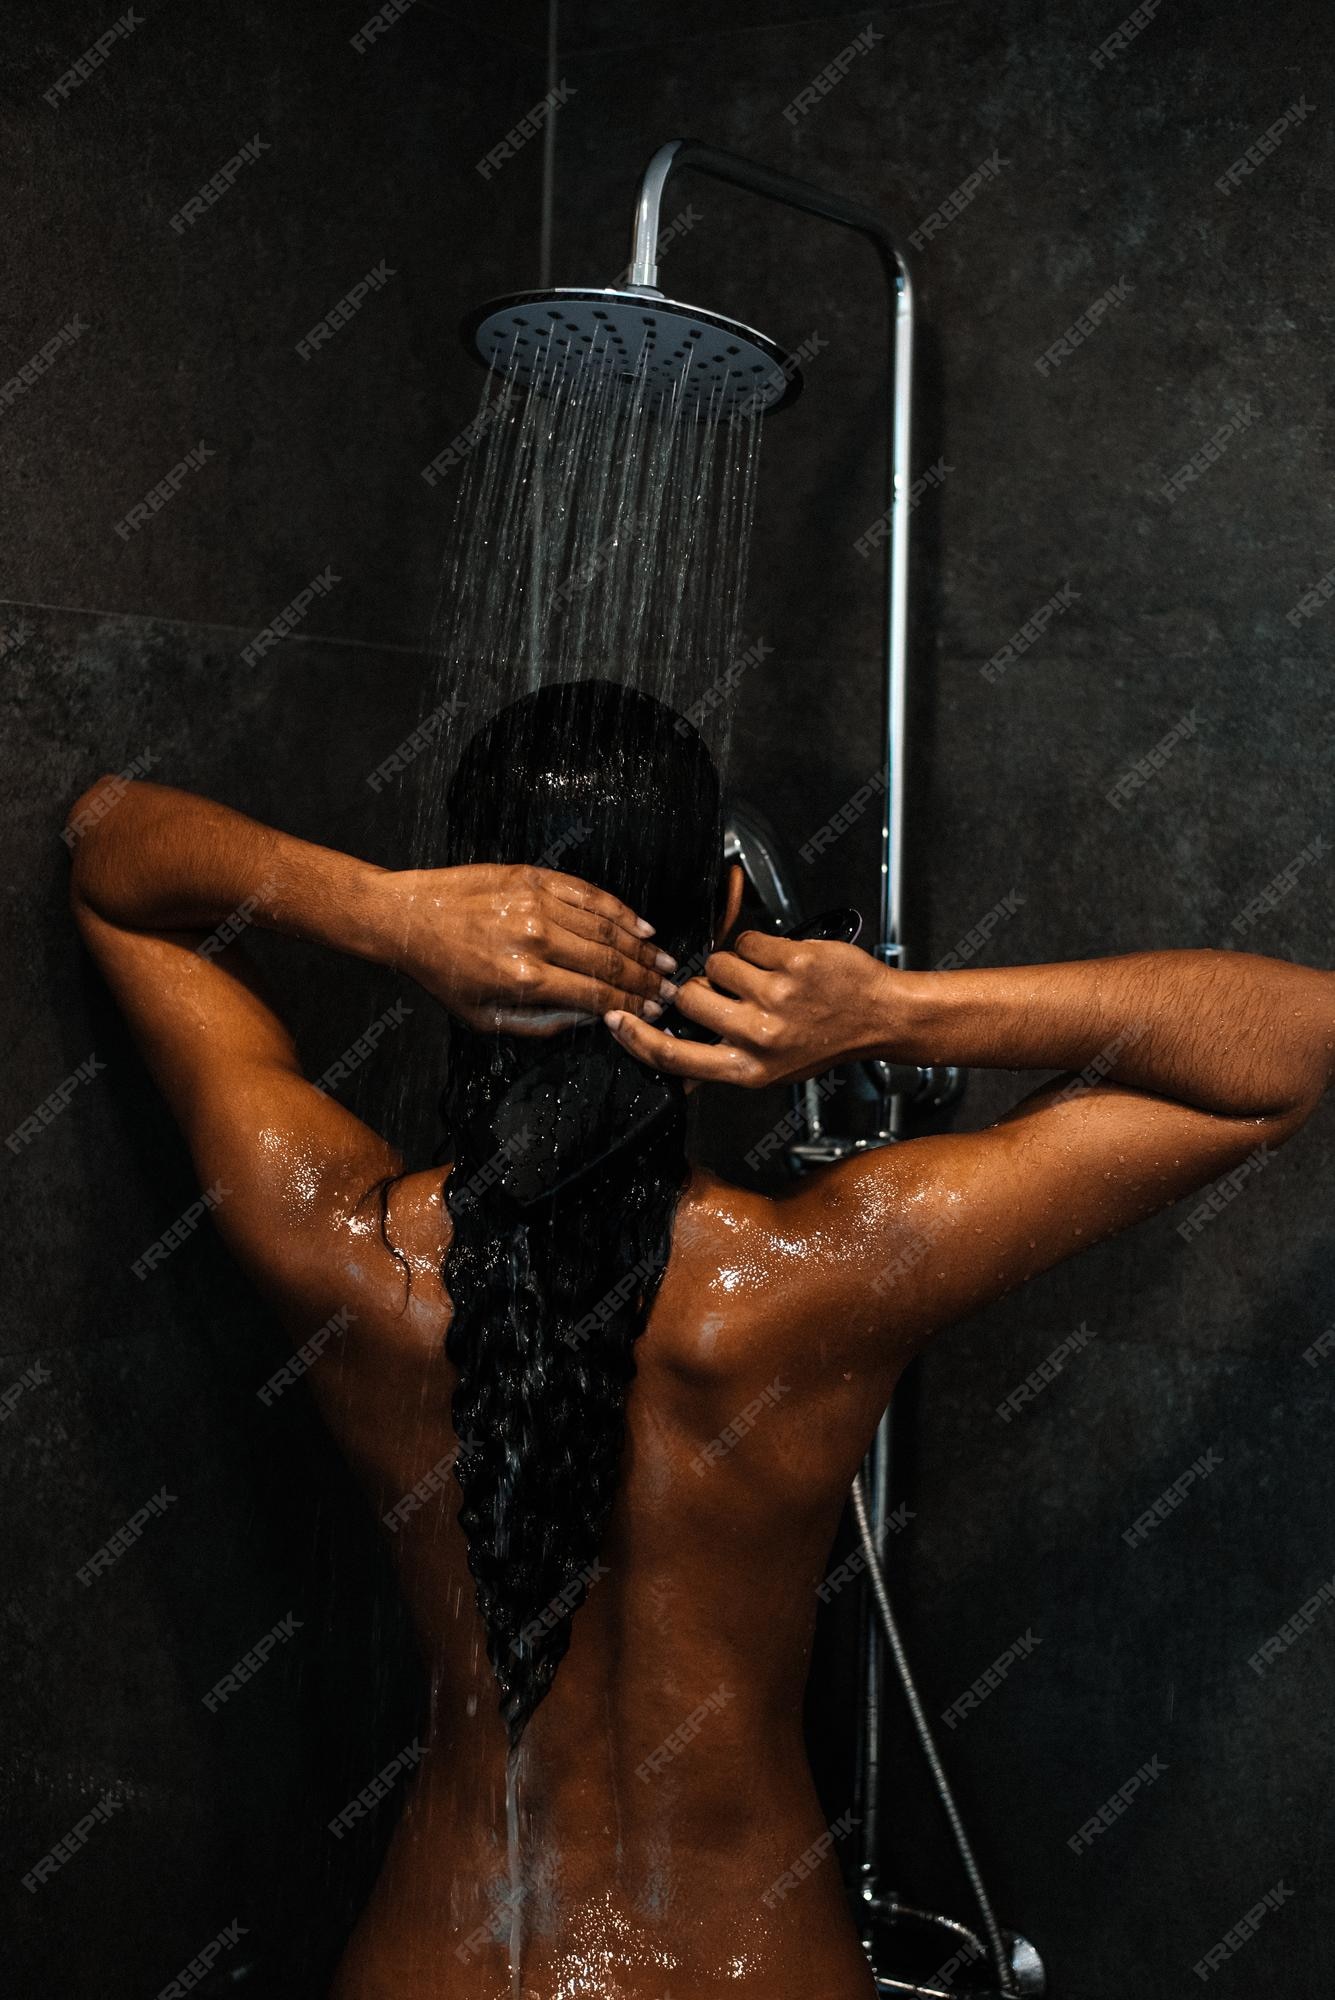 cynthia west share hot black girl in shower photos